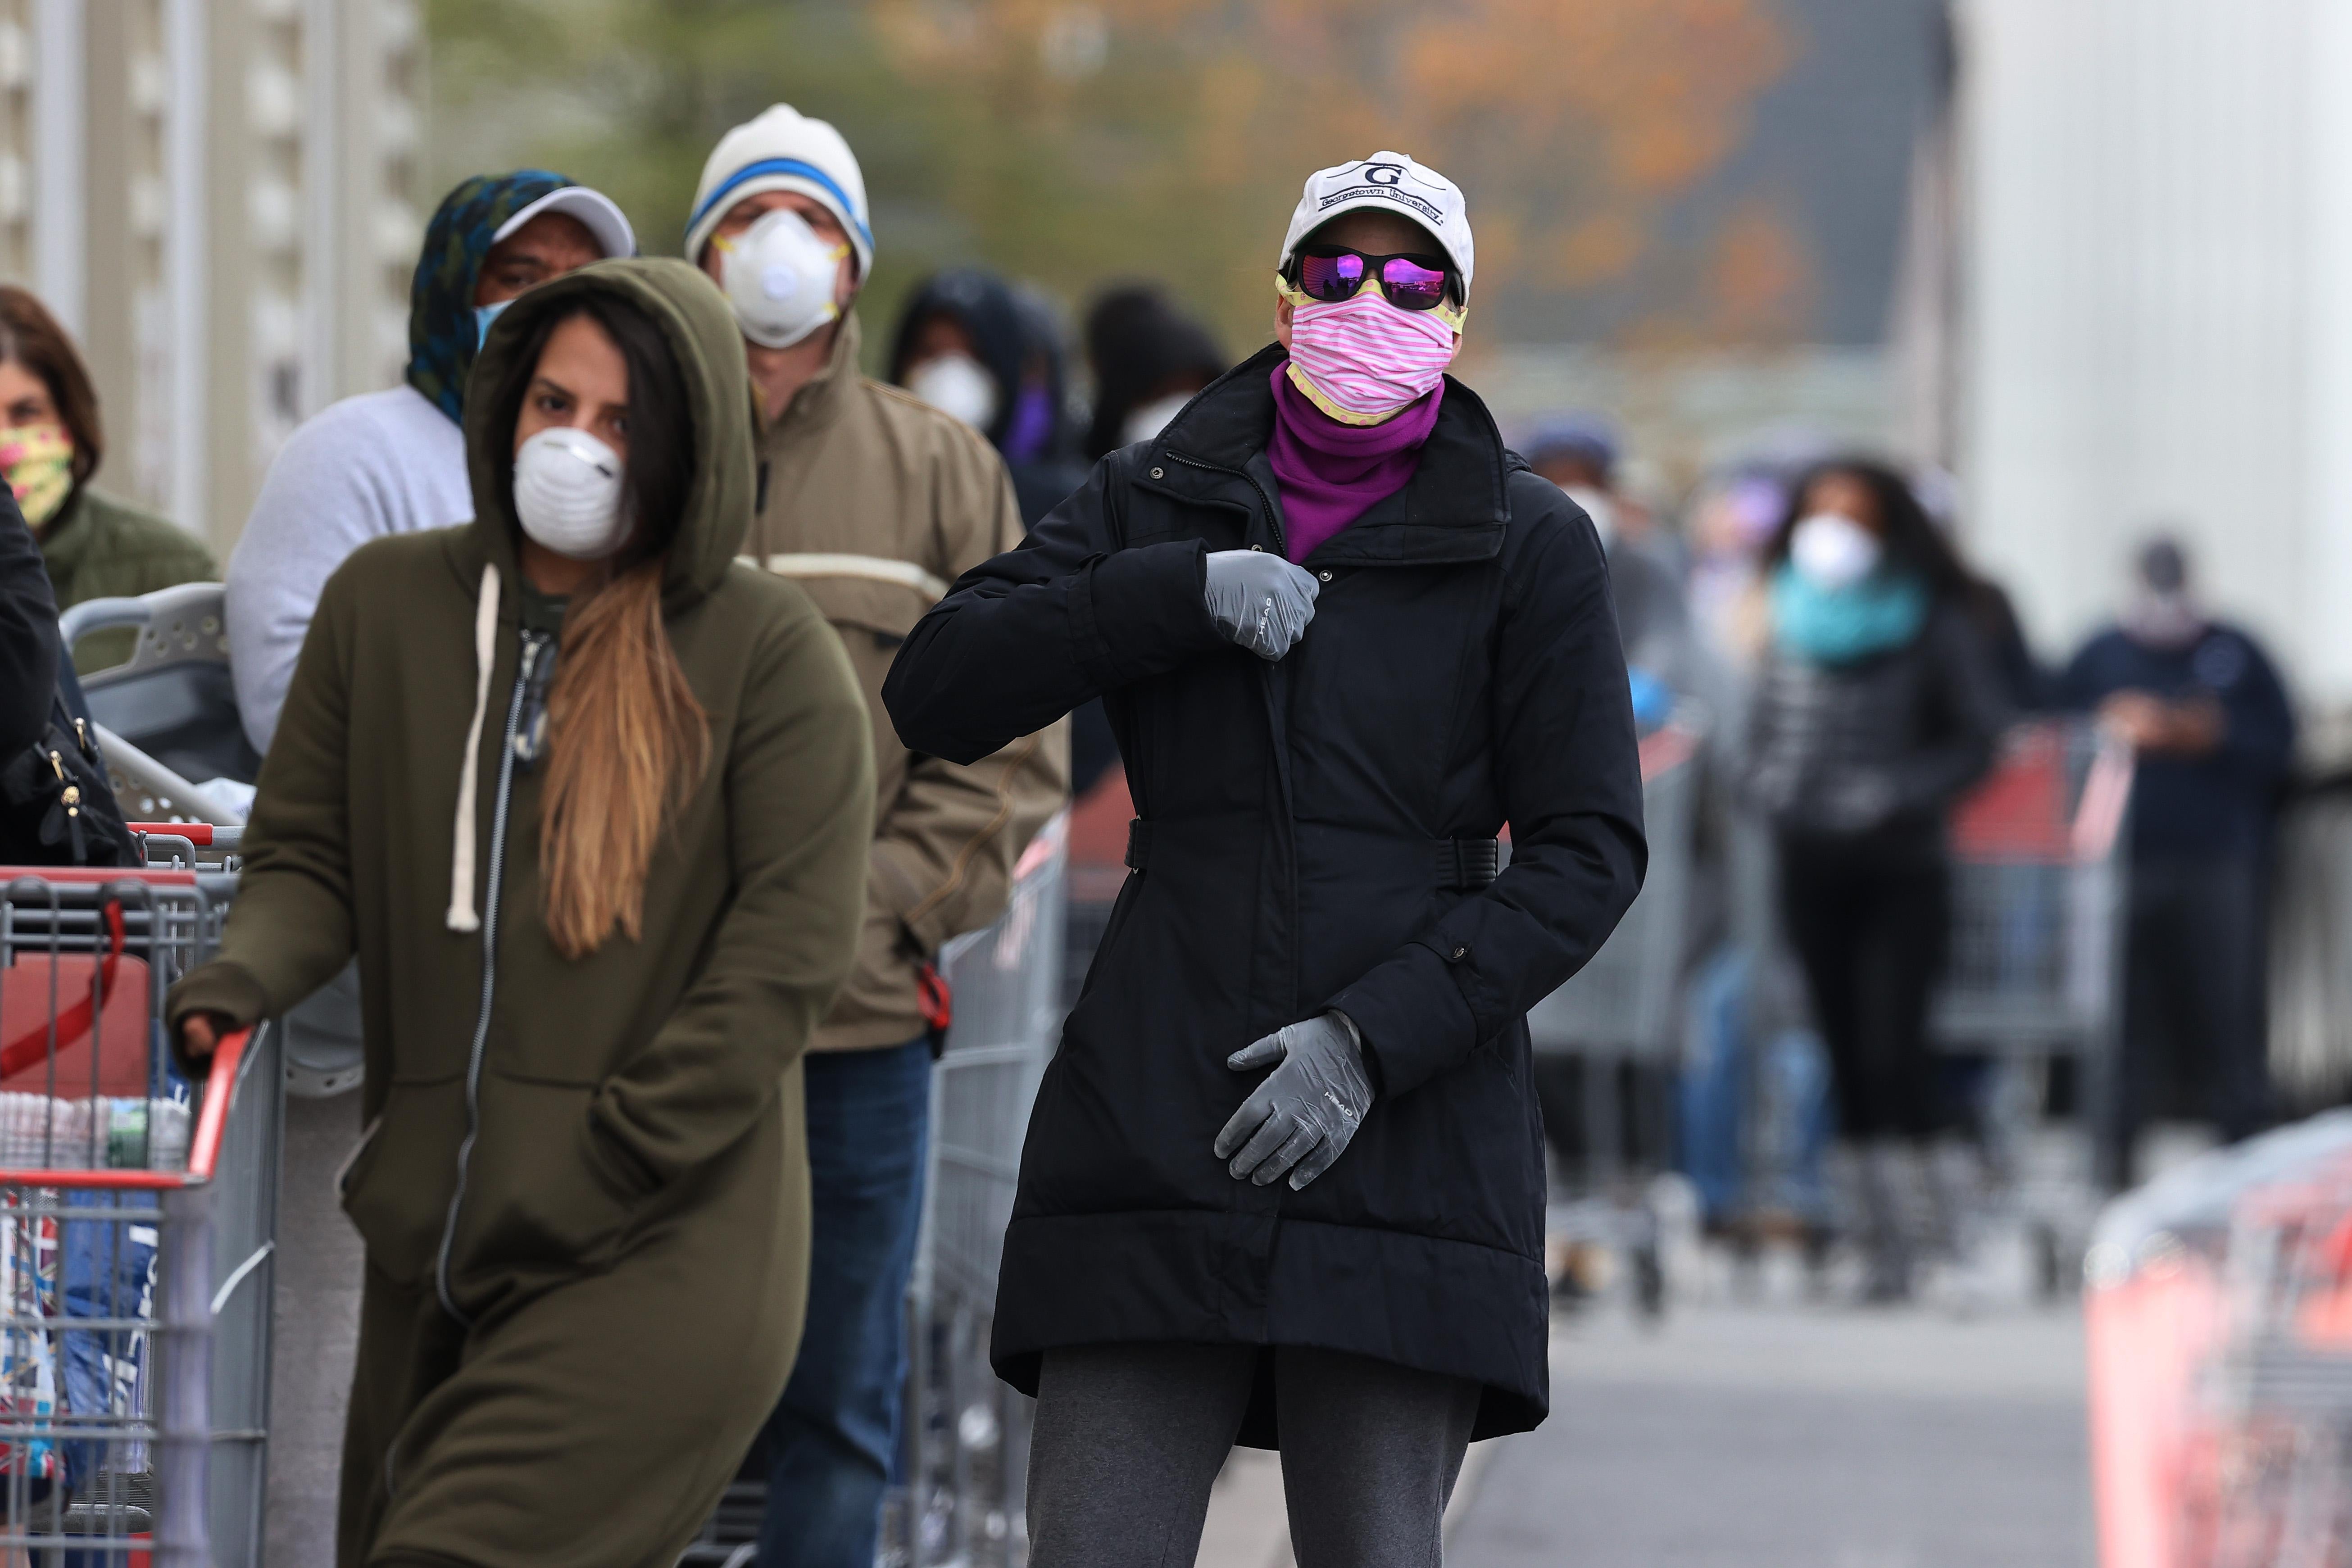 A long line of customers wearing masks and winter coats and pushing shopping carts